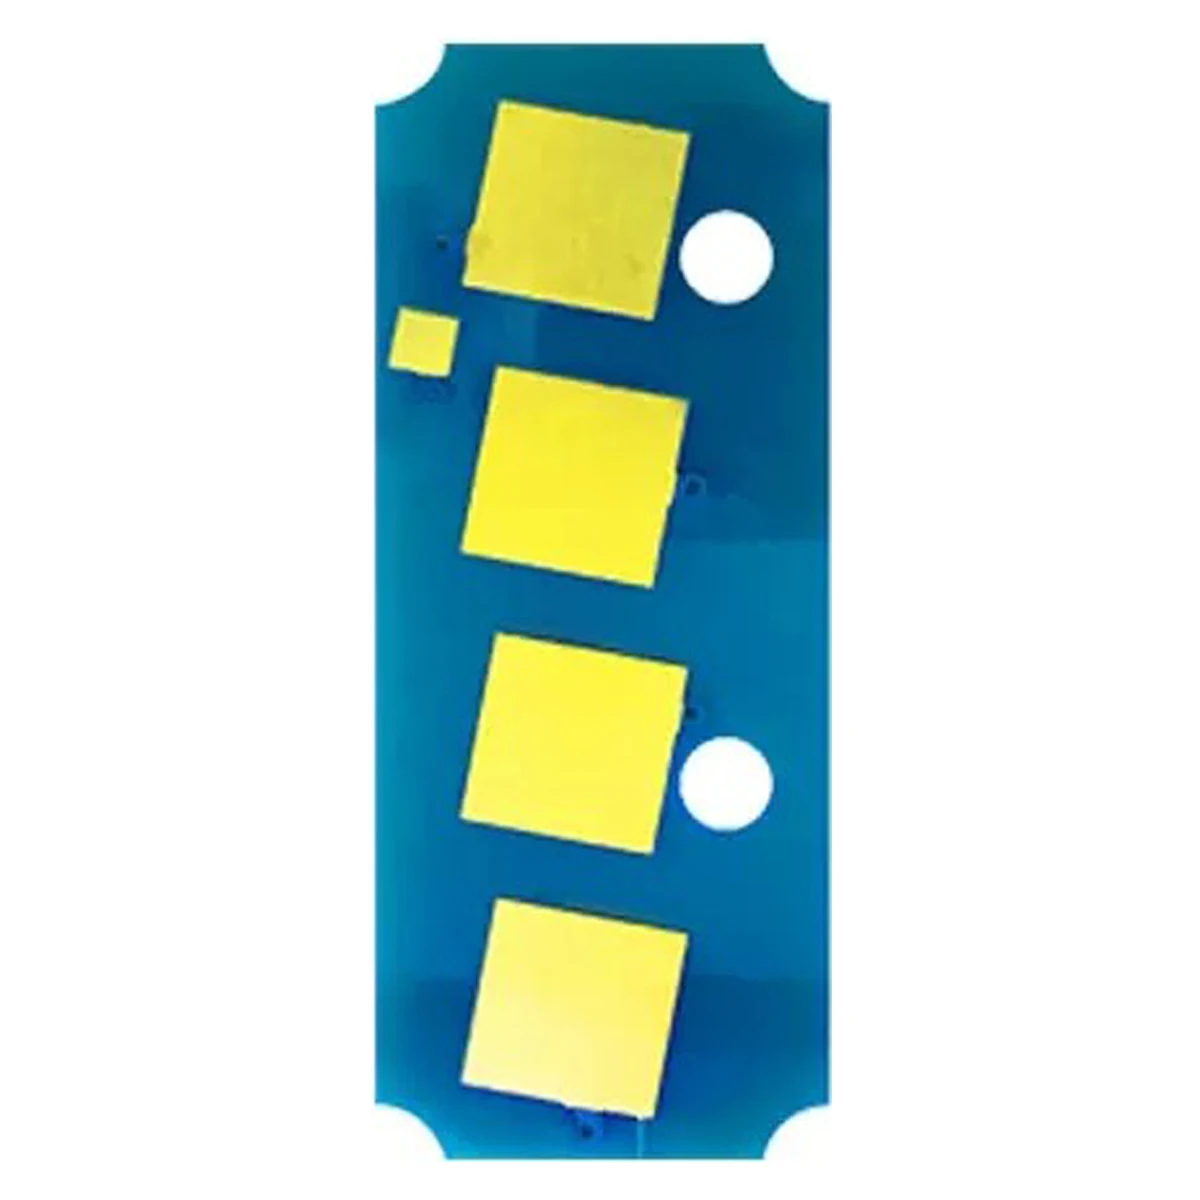 

Toner Chip Reset For Toshiba TFC425 M TFC425 Y T FC425 K T FC425 C T FC425 M T FC425 Y T-FC-425 K T-FC-425 C T-FC-425 M